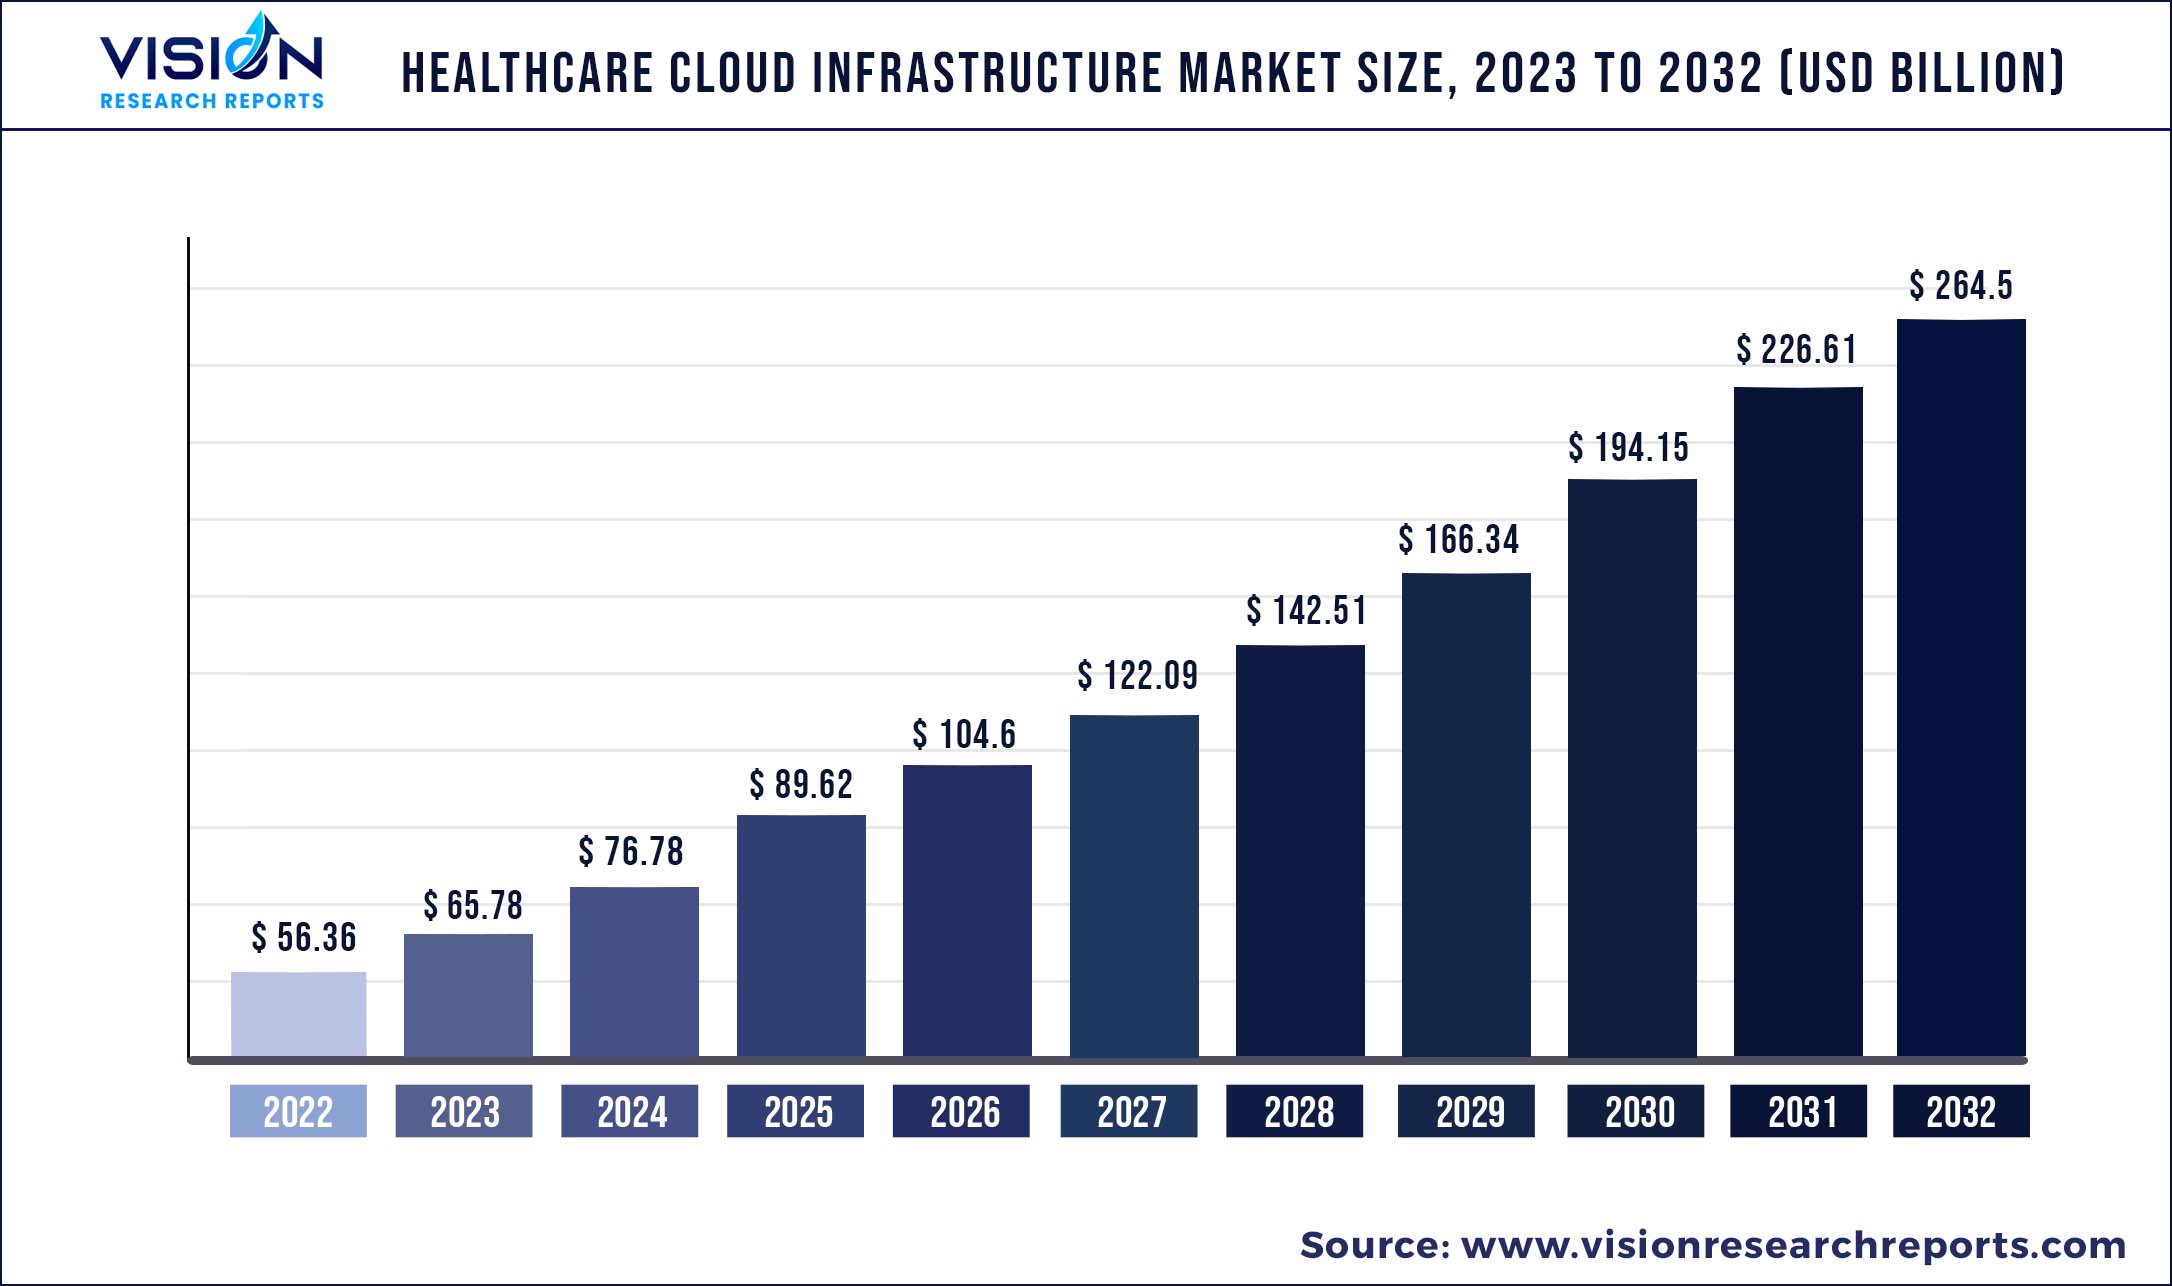 Healthcare Cloud Infrastructure Market Size 2023 to 2032